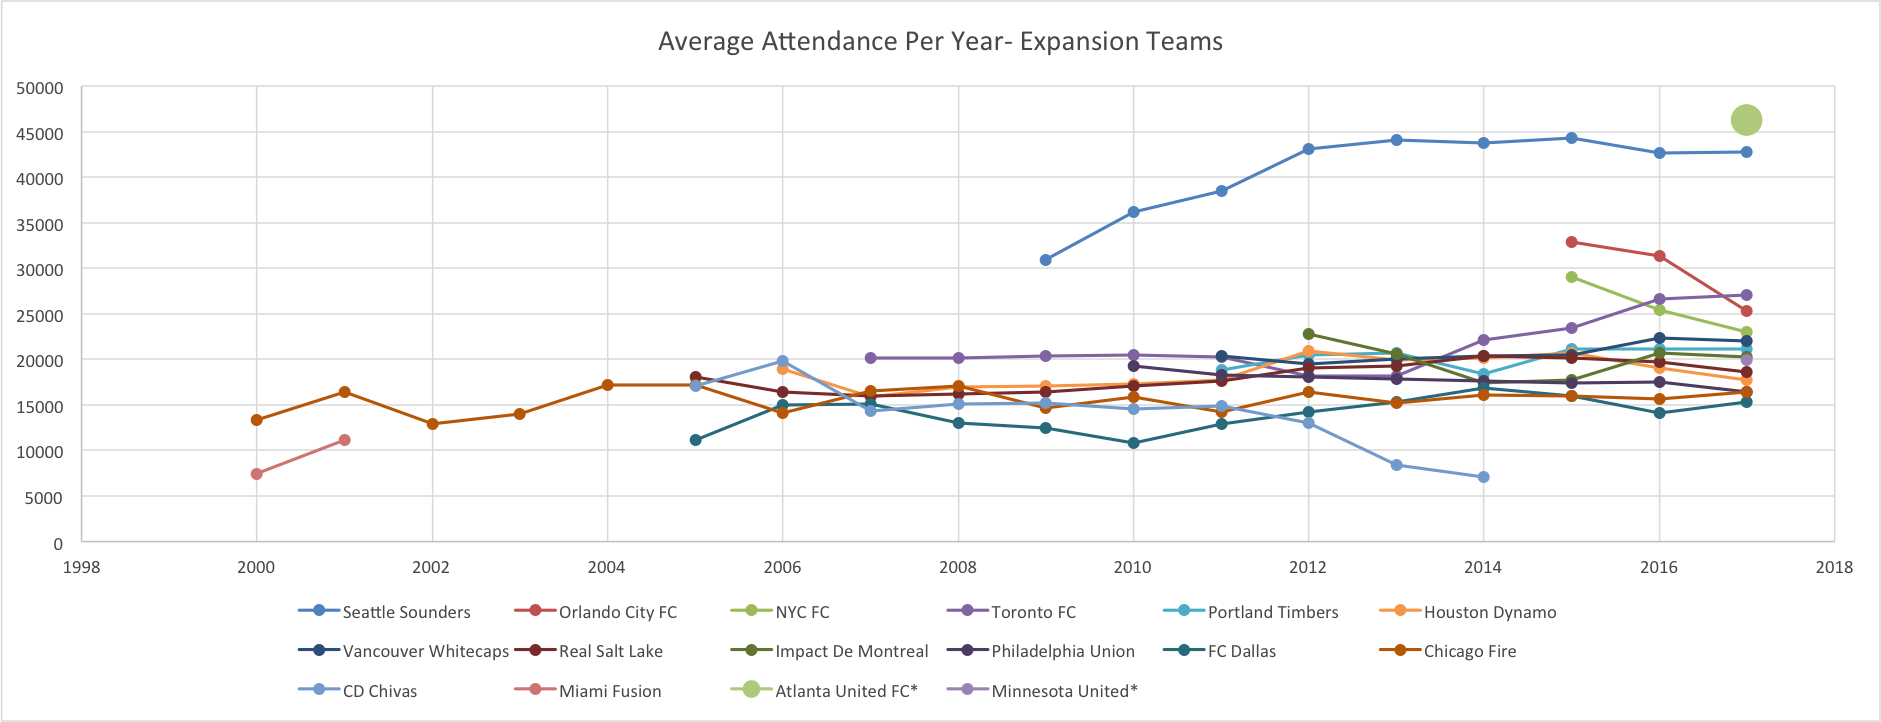 MLS Average Attendance Per Year for Expansion Team